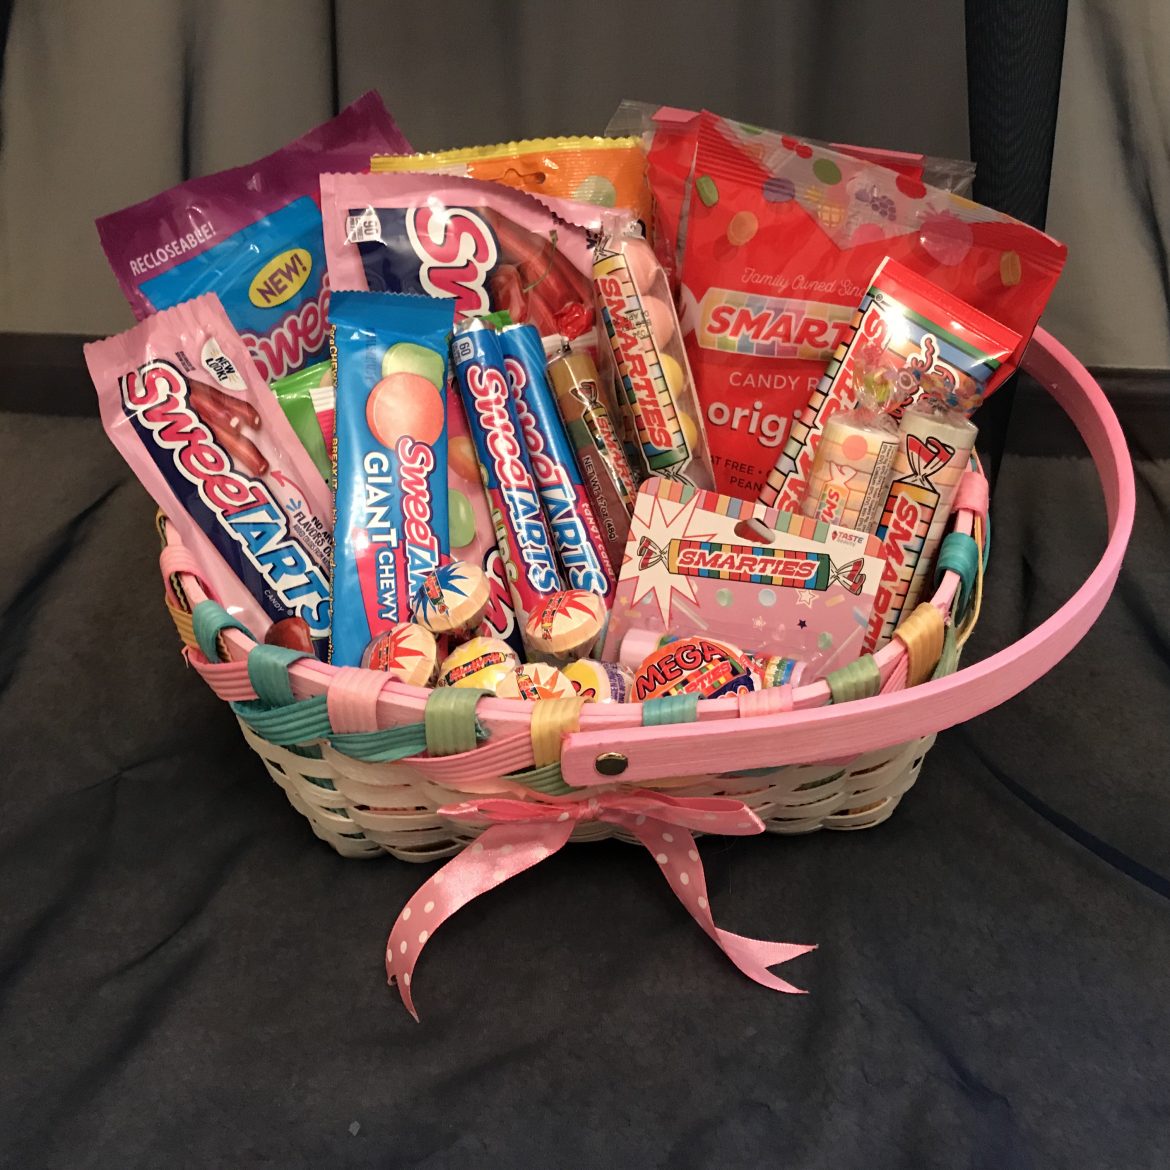 How candies could be good choice for gifts?